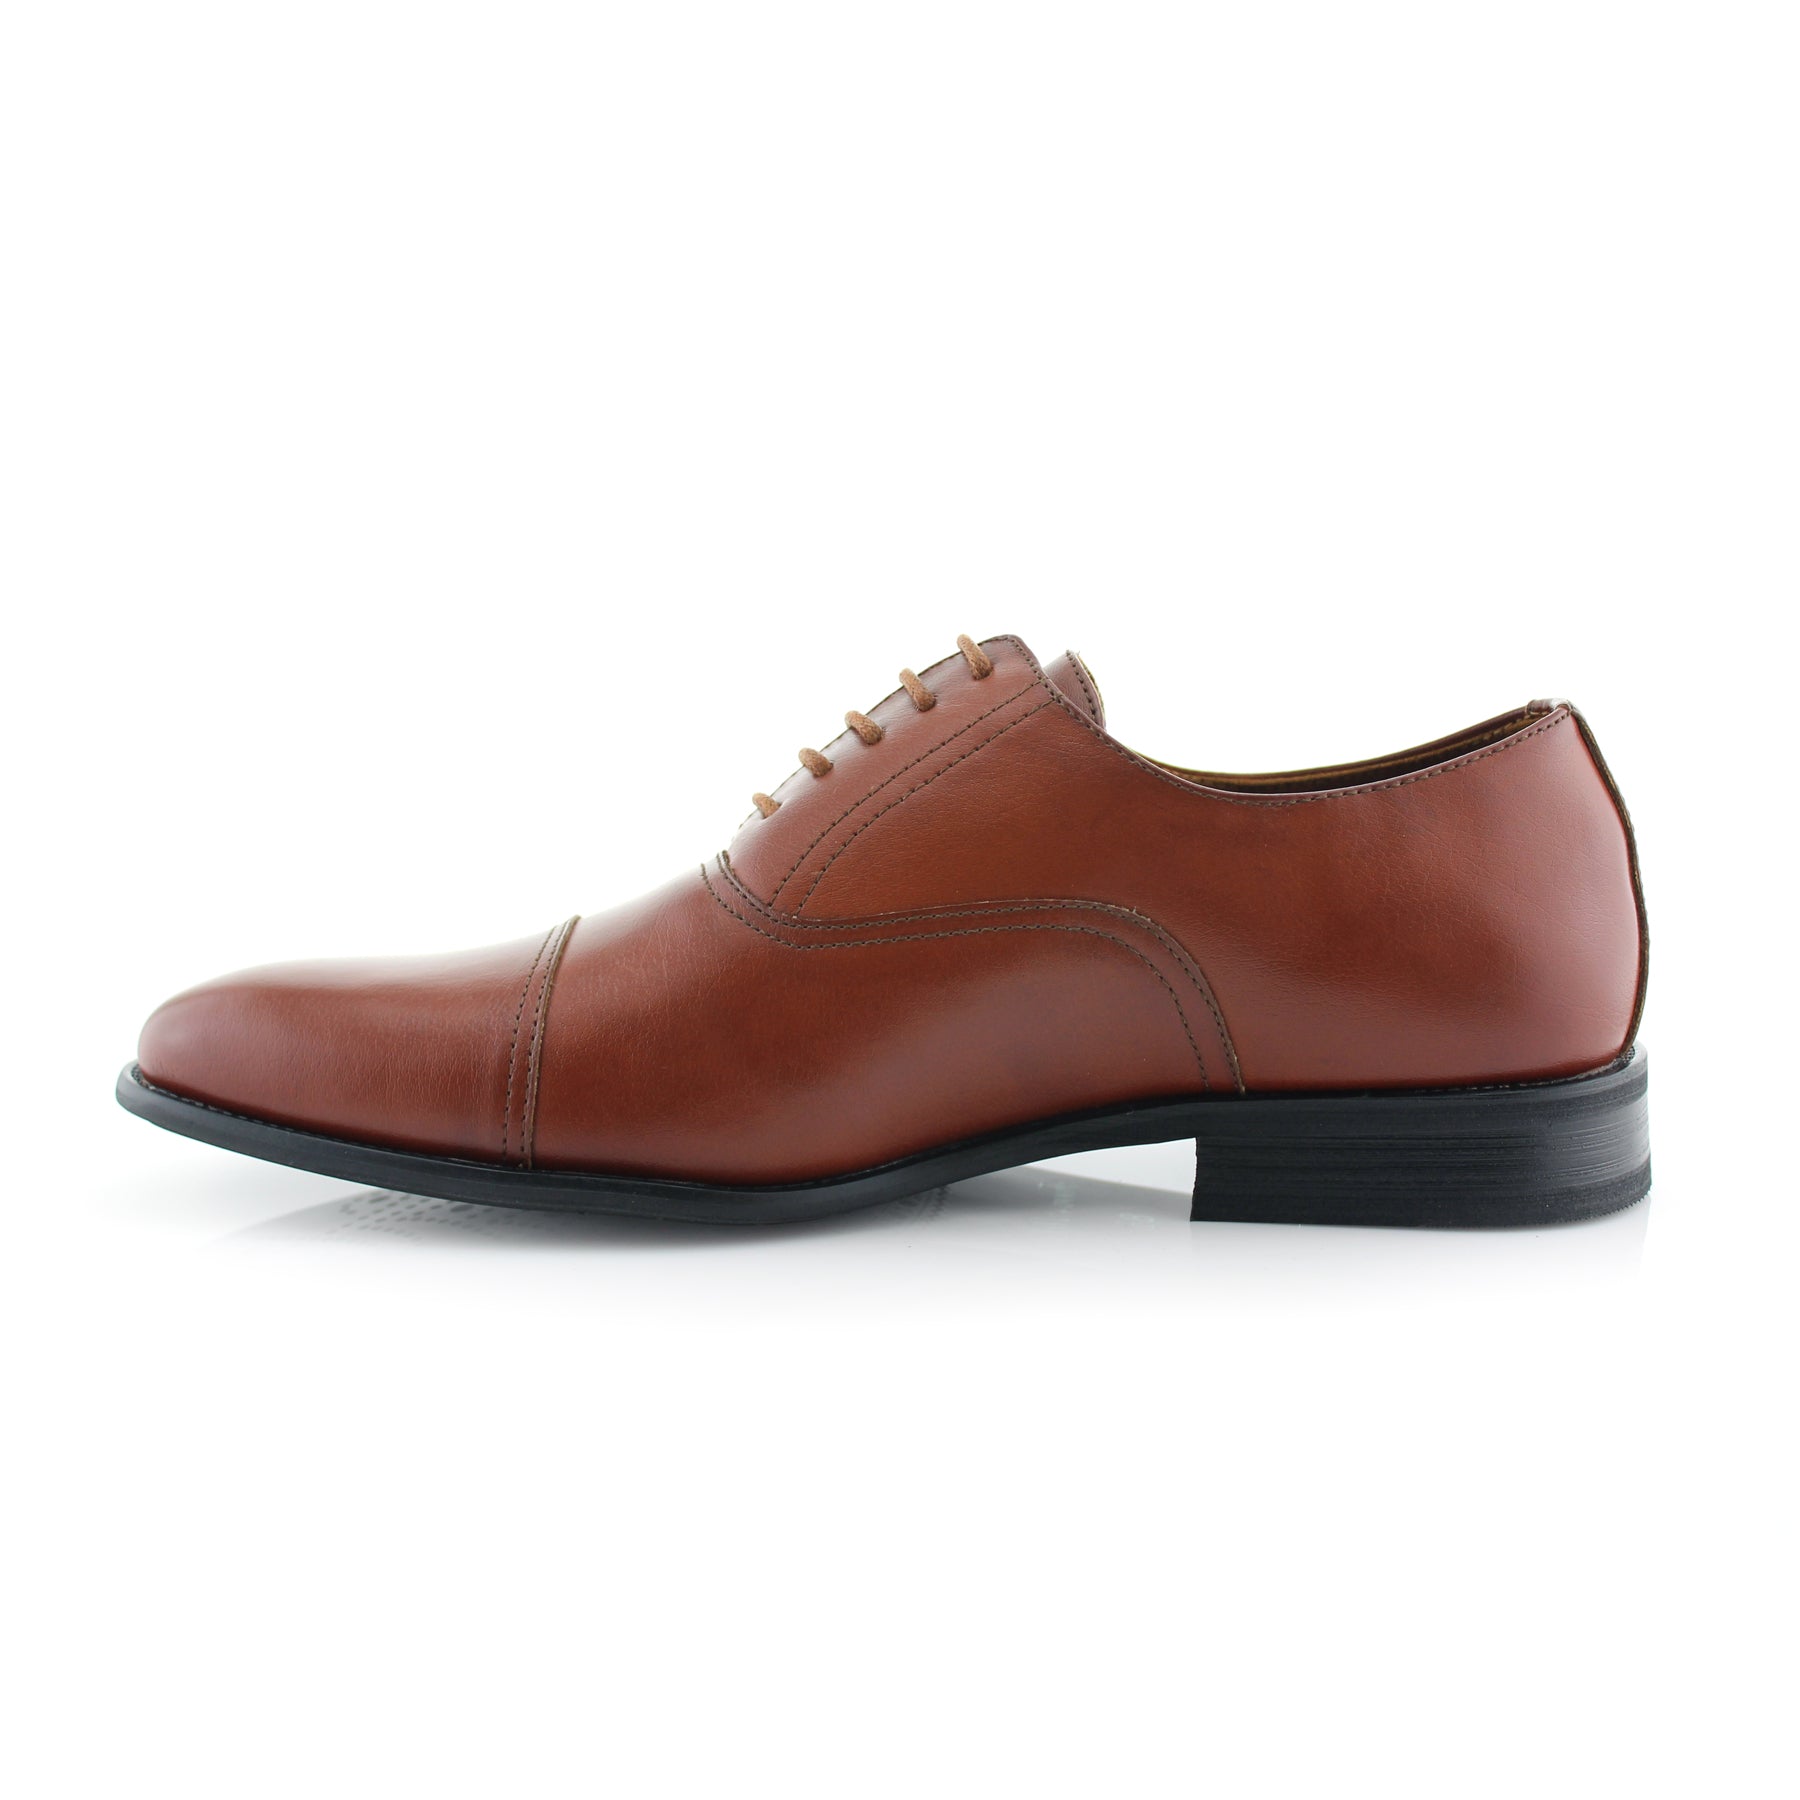 Classic Cap-Toe Oxford Dress Shoes | Charles by Ferro Aldo | Conal Footwear | Inner Side Angle View